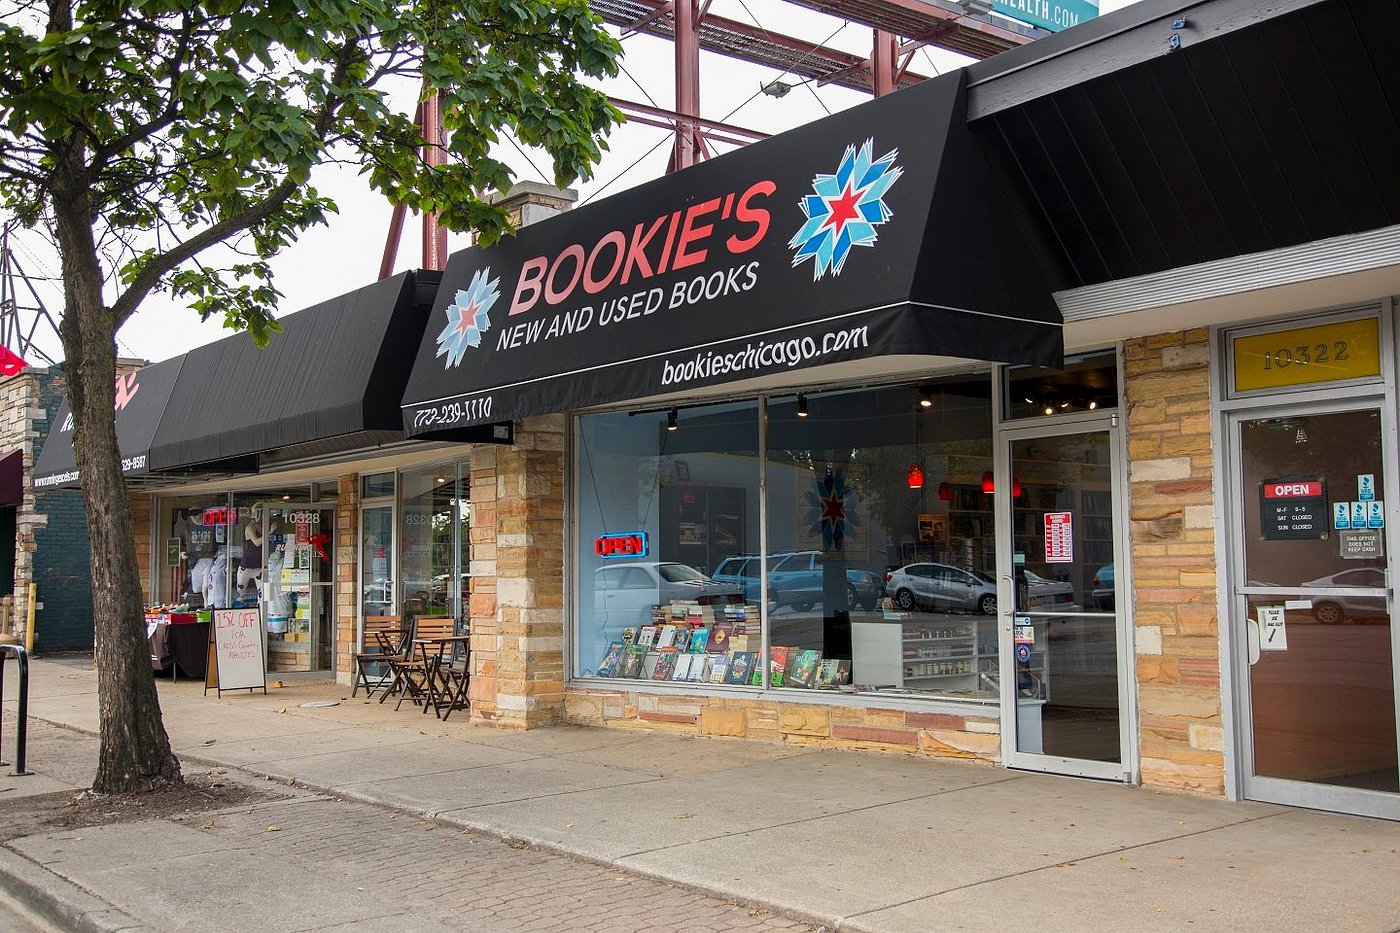 Bookie's New & Used Books